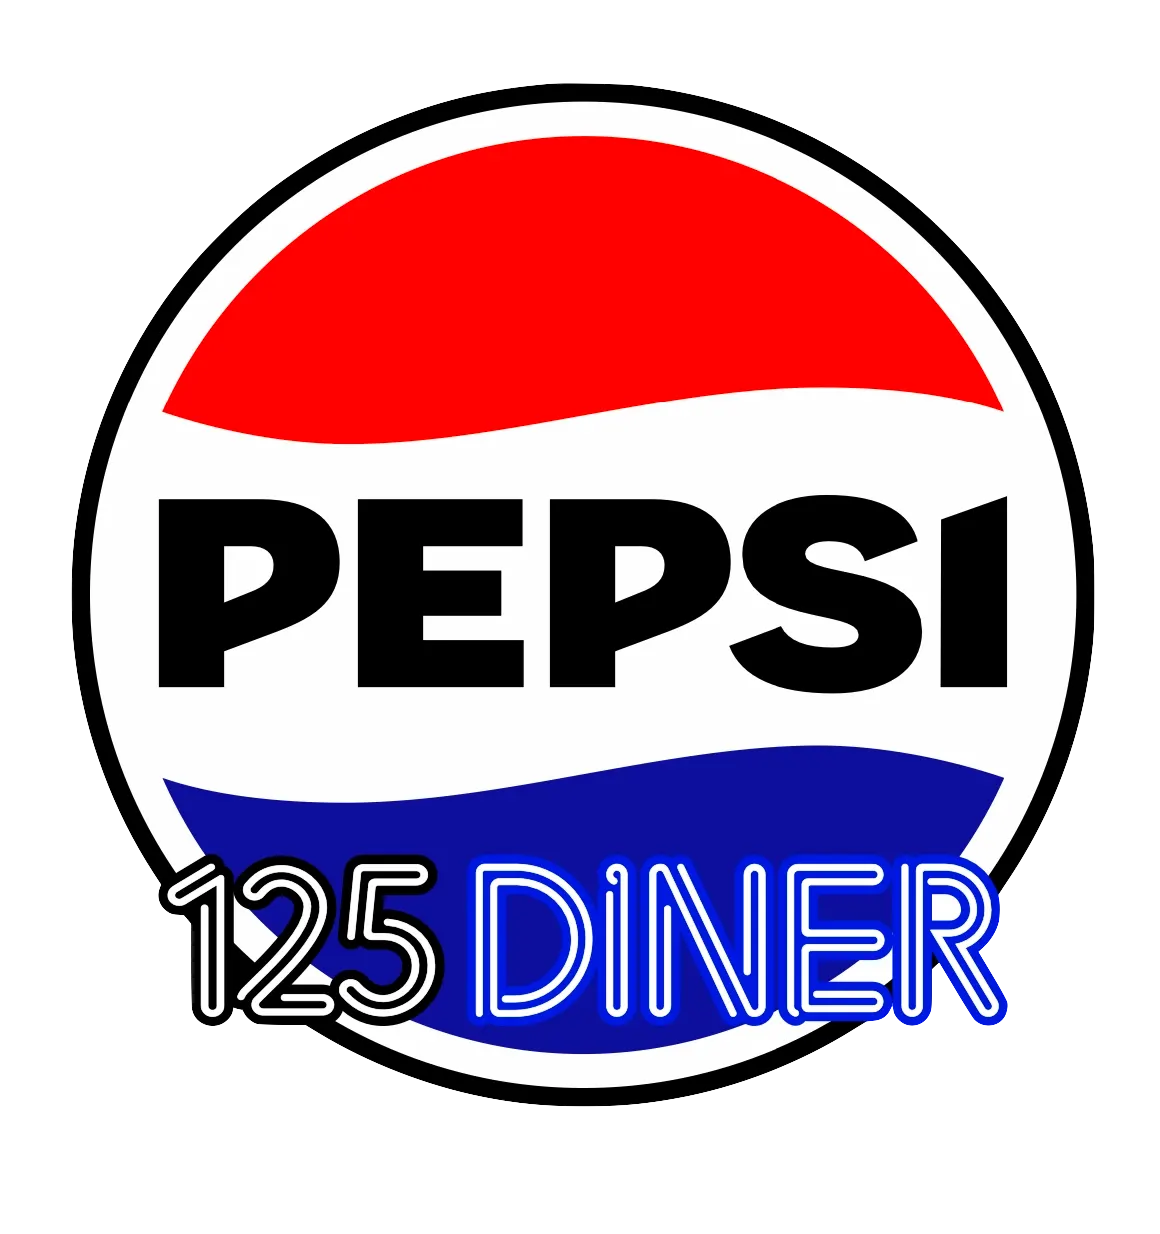 The Pepsi 125 Diner in New York City